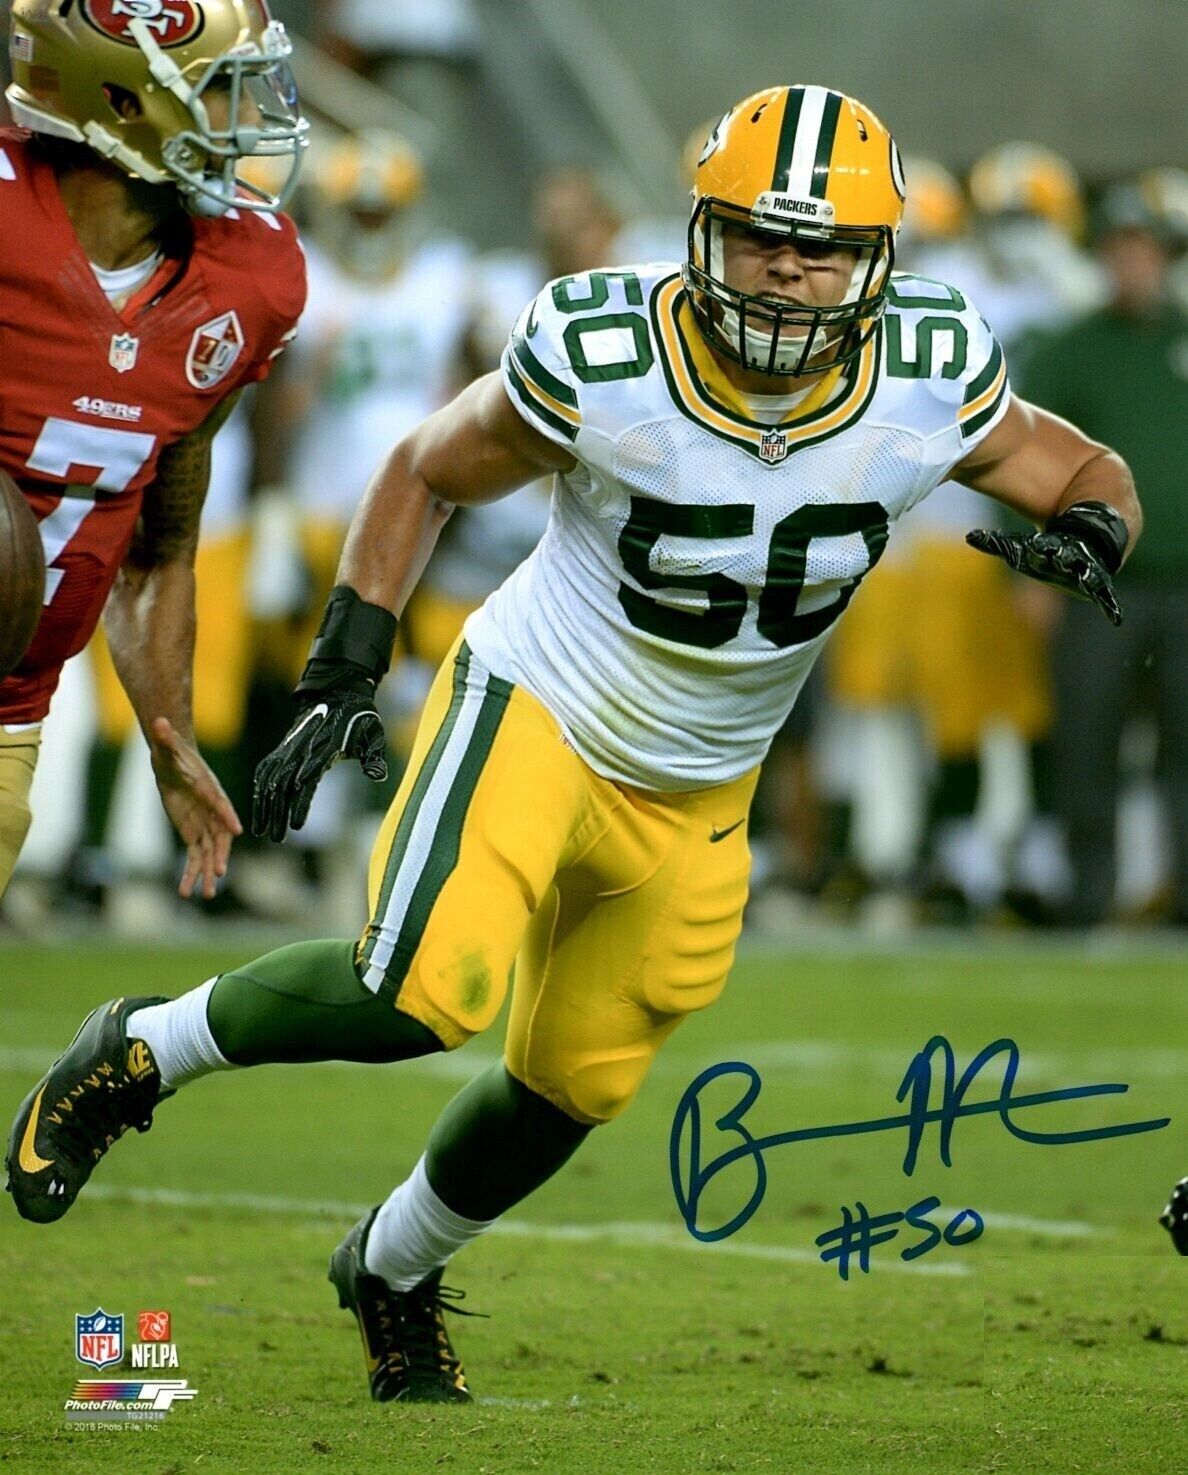 Blake Martinez Autographed Signed 8x10 Photo Poster painting ( Packers ) REPRINT